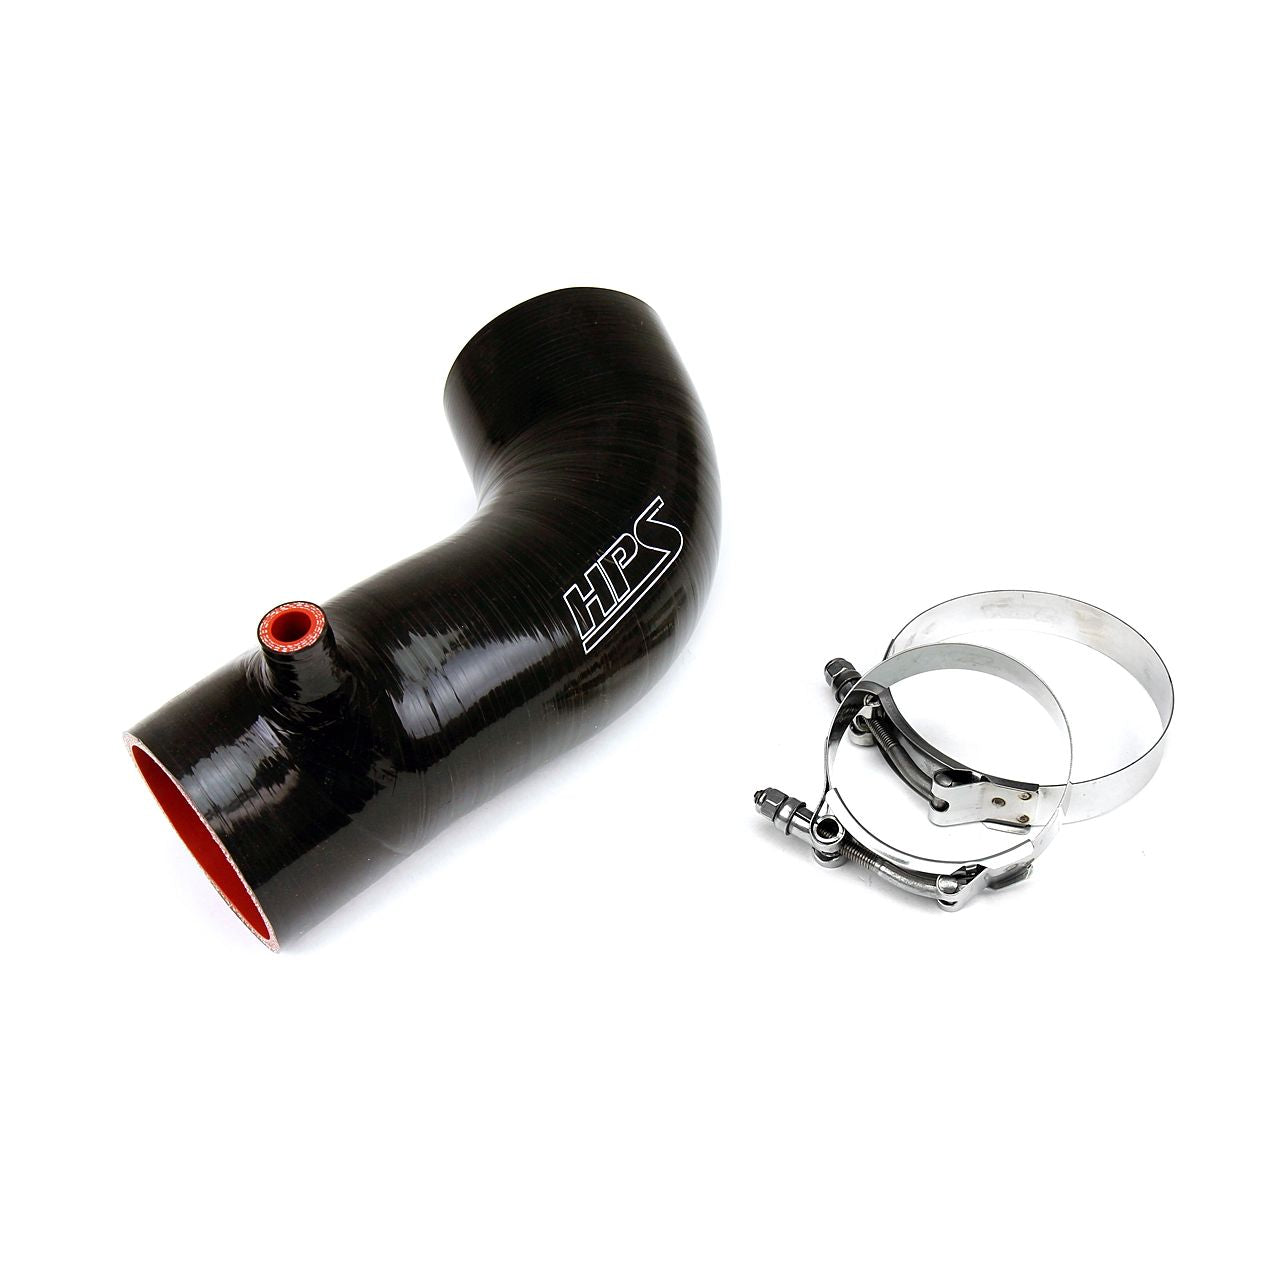 HPS Black Reinforced Silicone Post MAF Air Intake Hose Kit for Acura 13-15 ILX